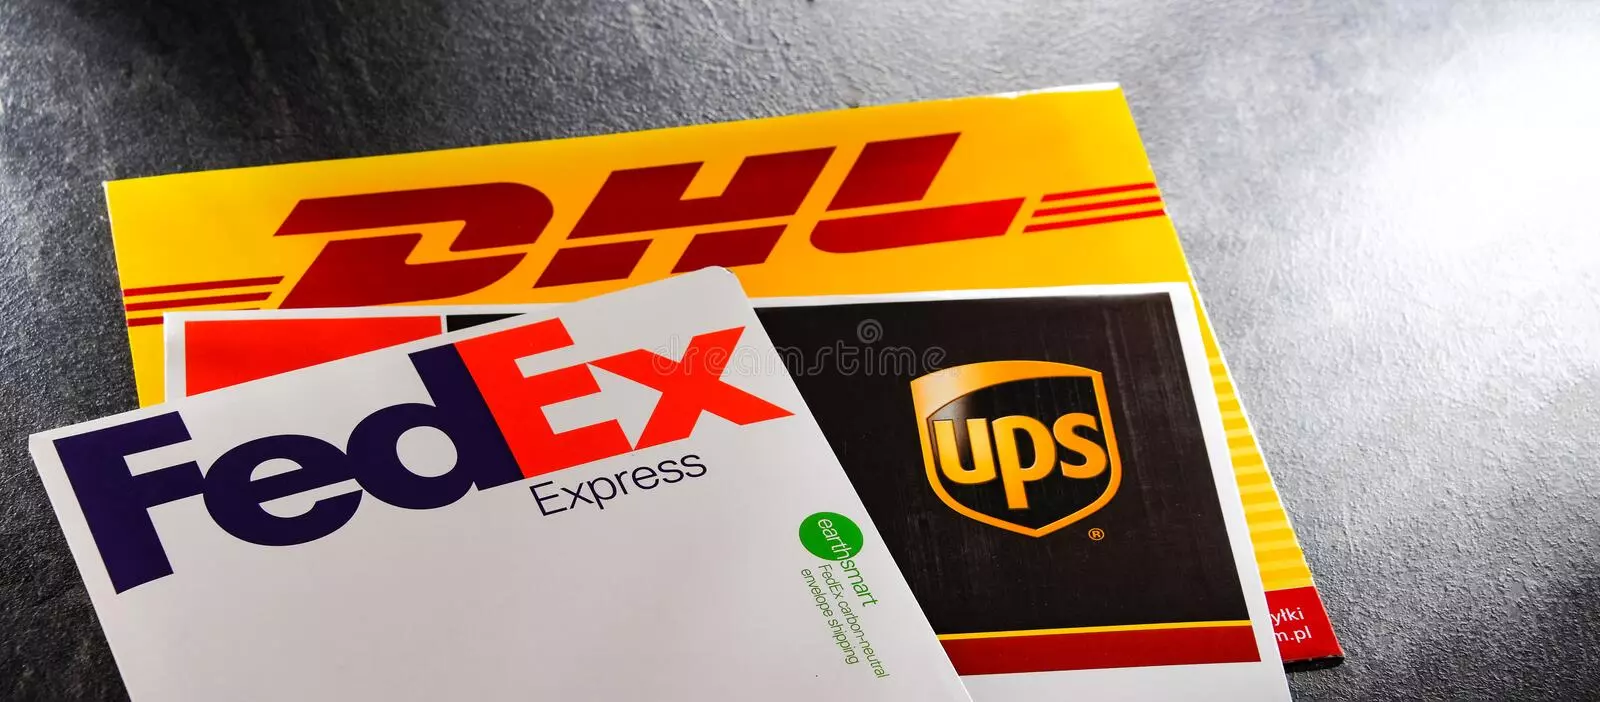 Which is More Expensive DHL or FedEx?